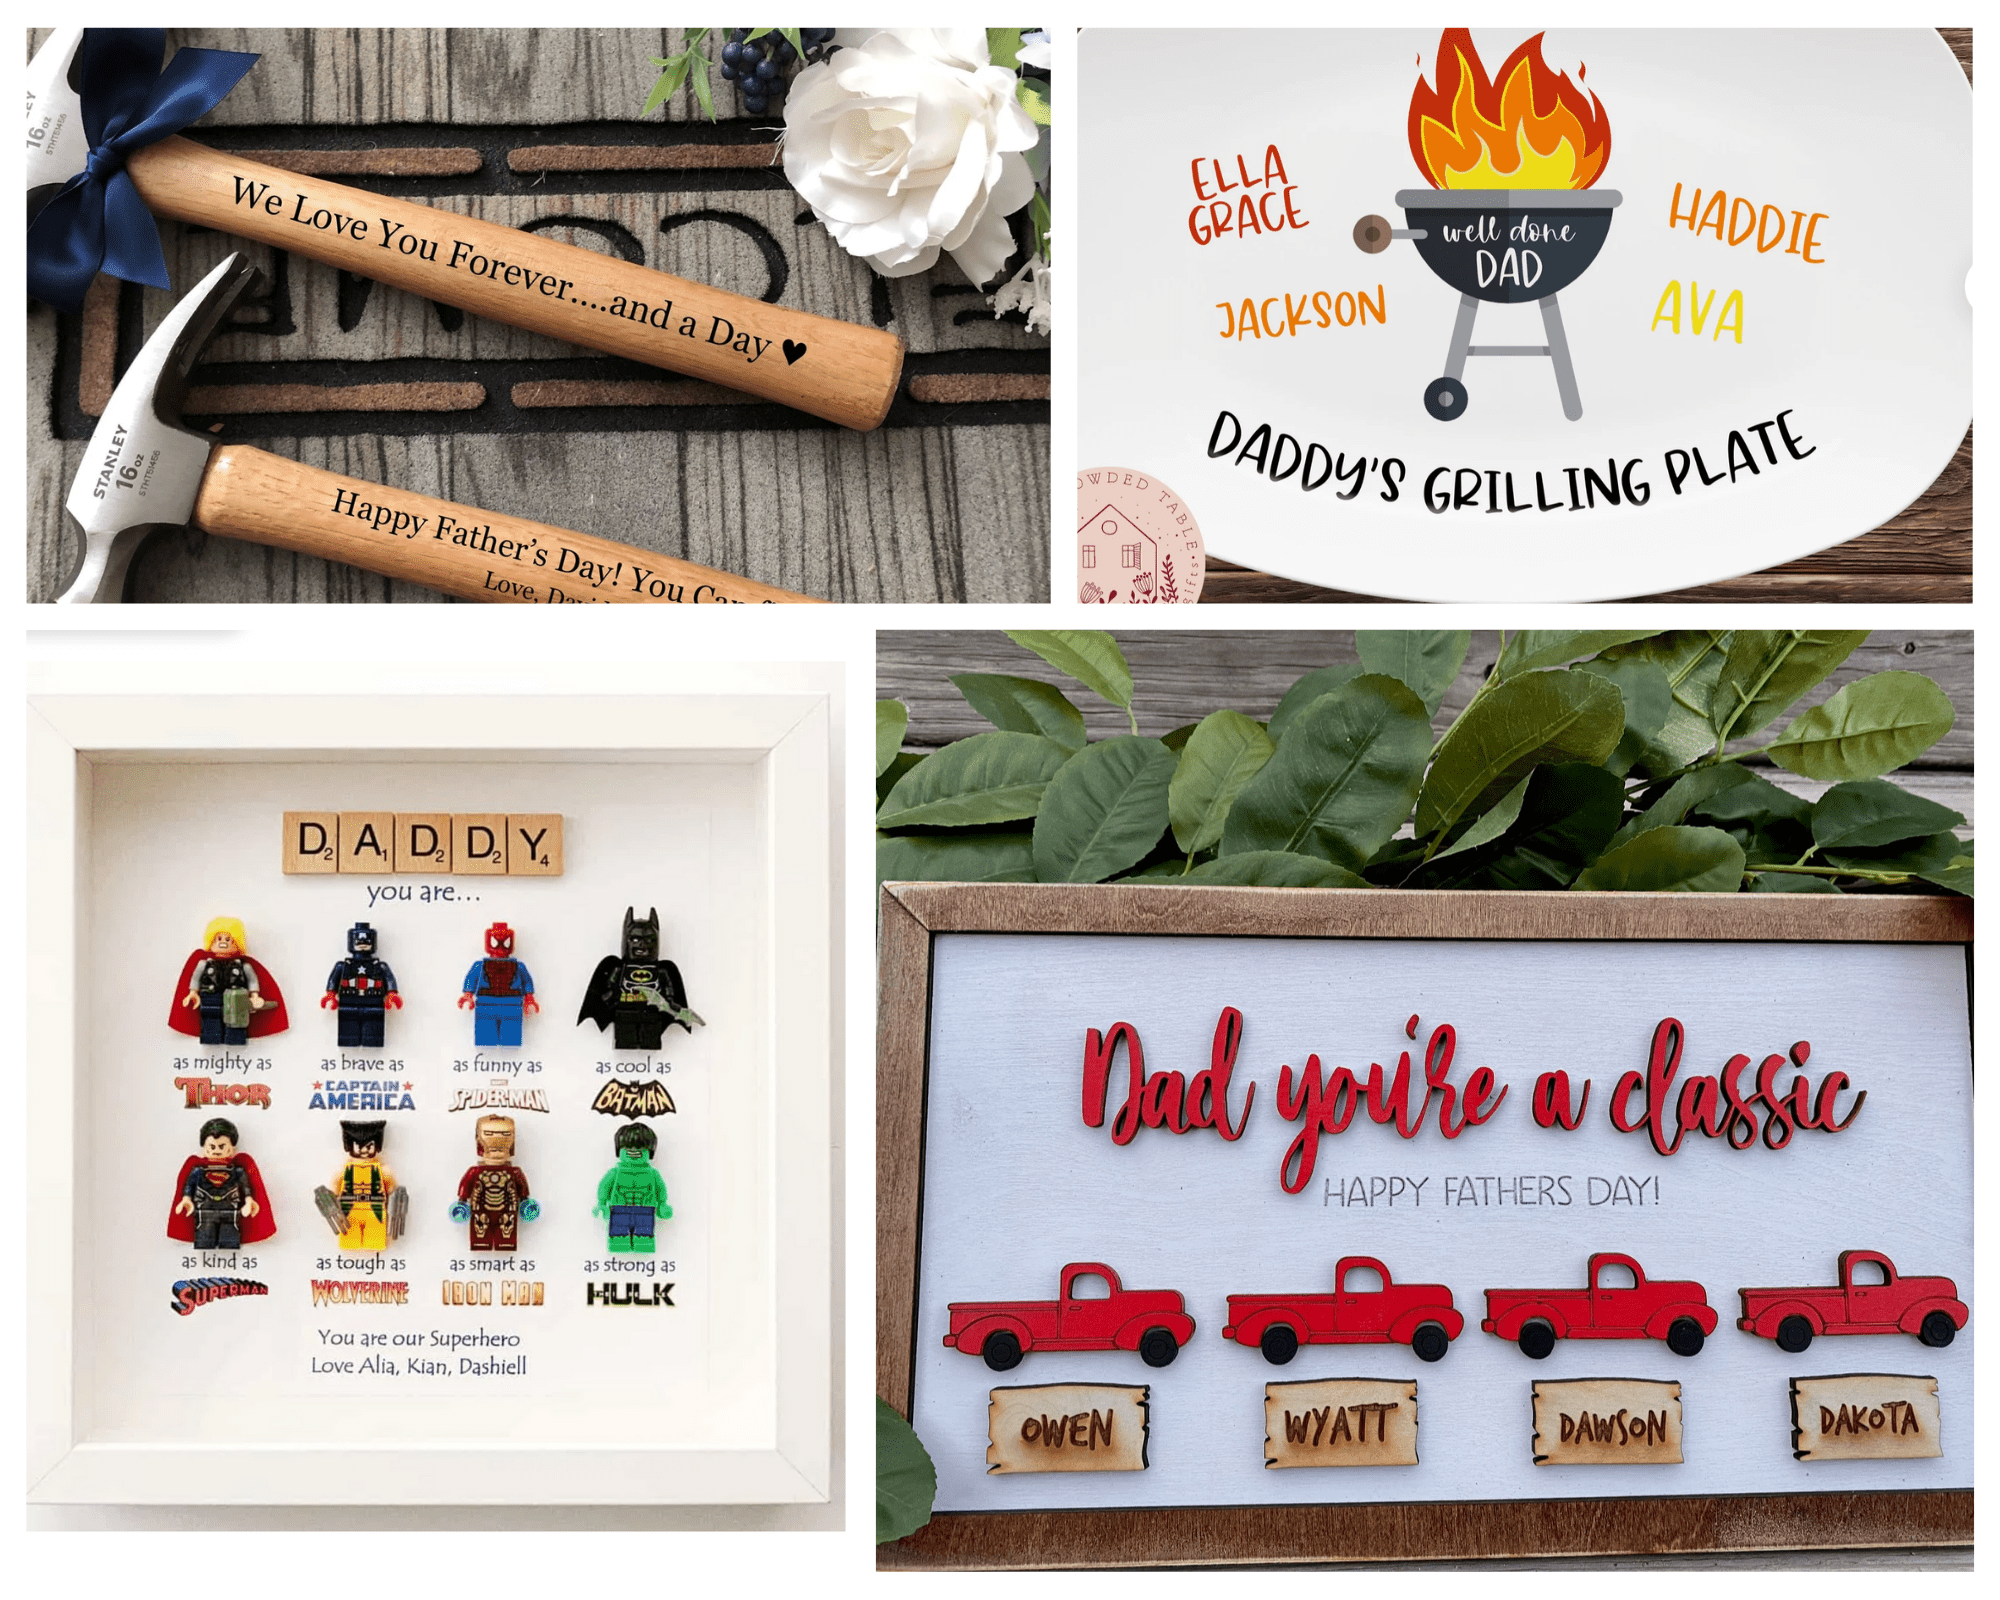 5 Last Minute Father's Day Gifts | Honest